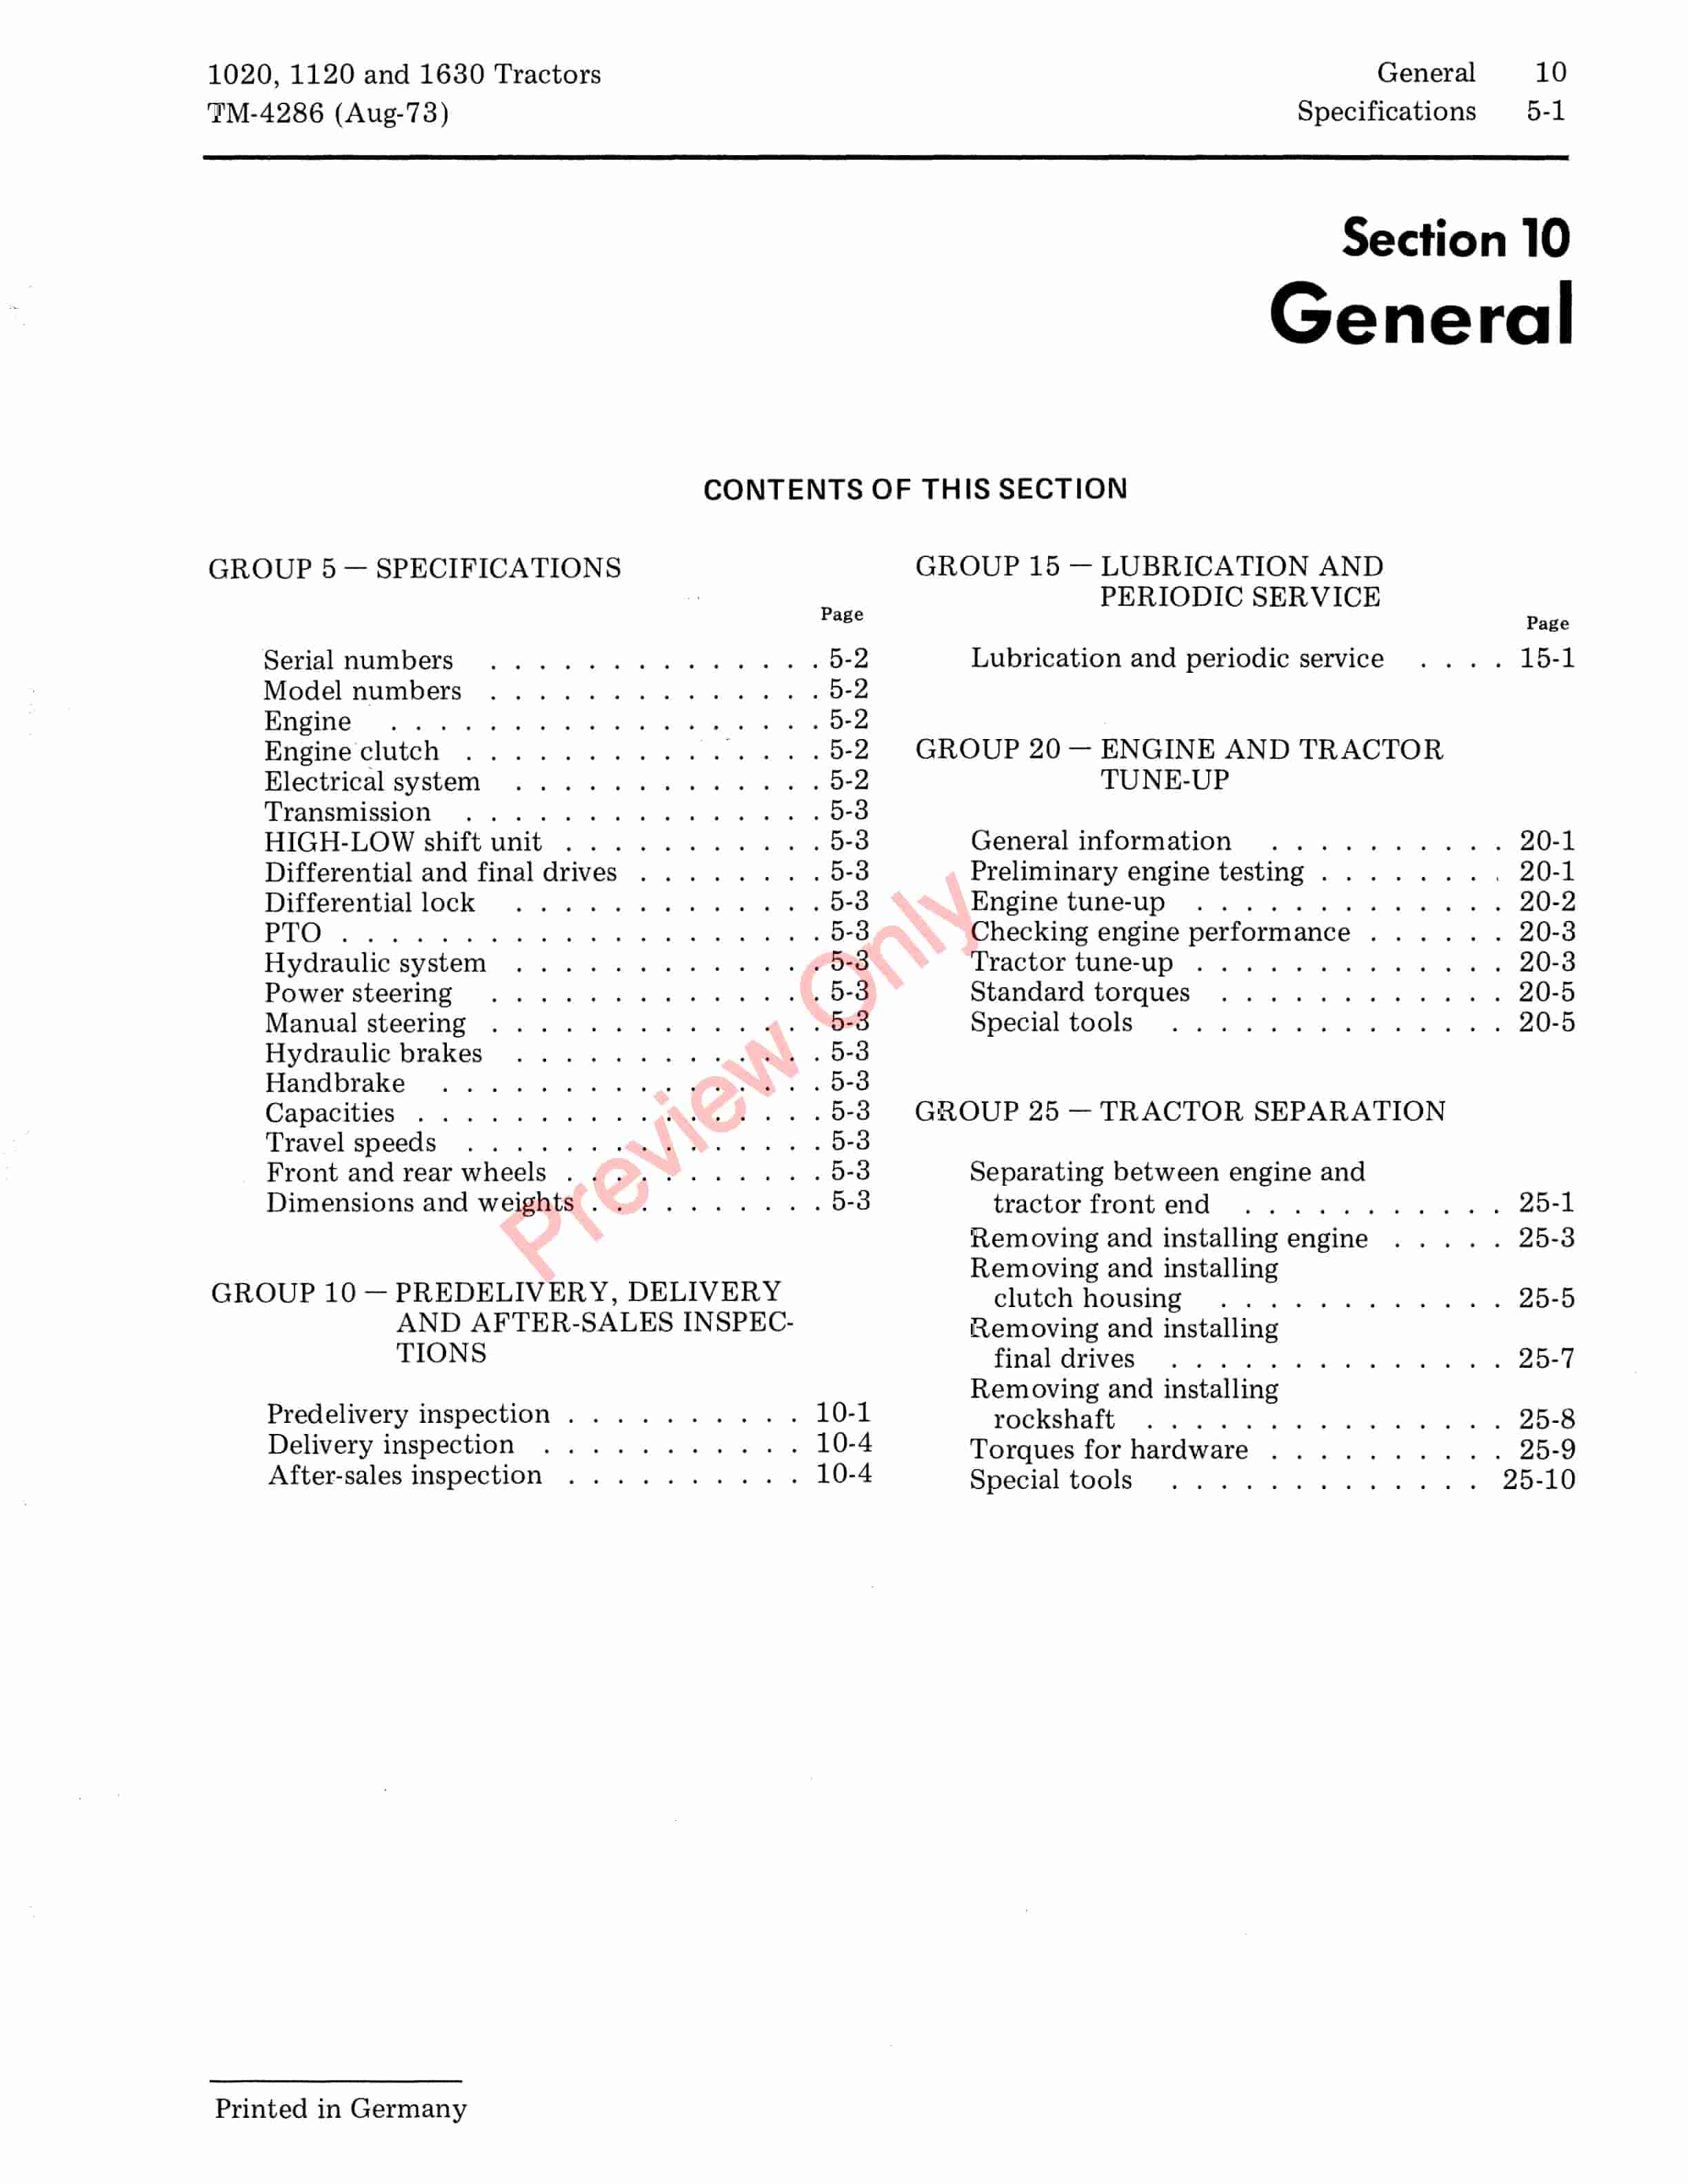 John Deere 1020 1120 And 1630 Tractor Technical Manual TM4286 01AUG73 5